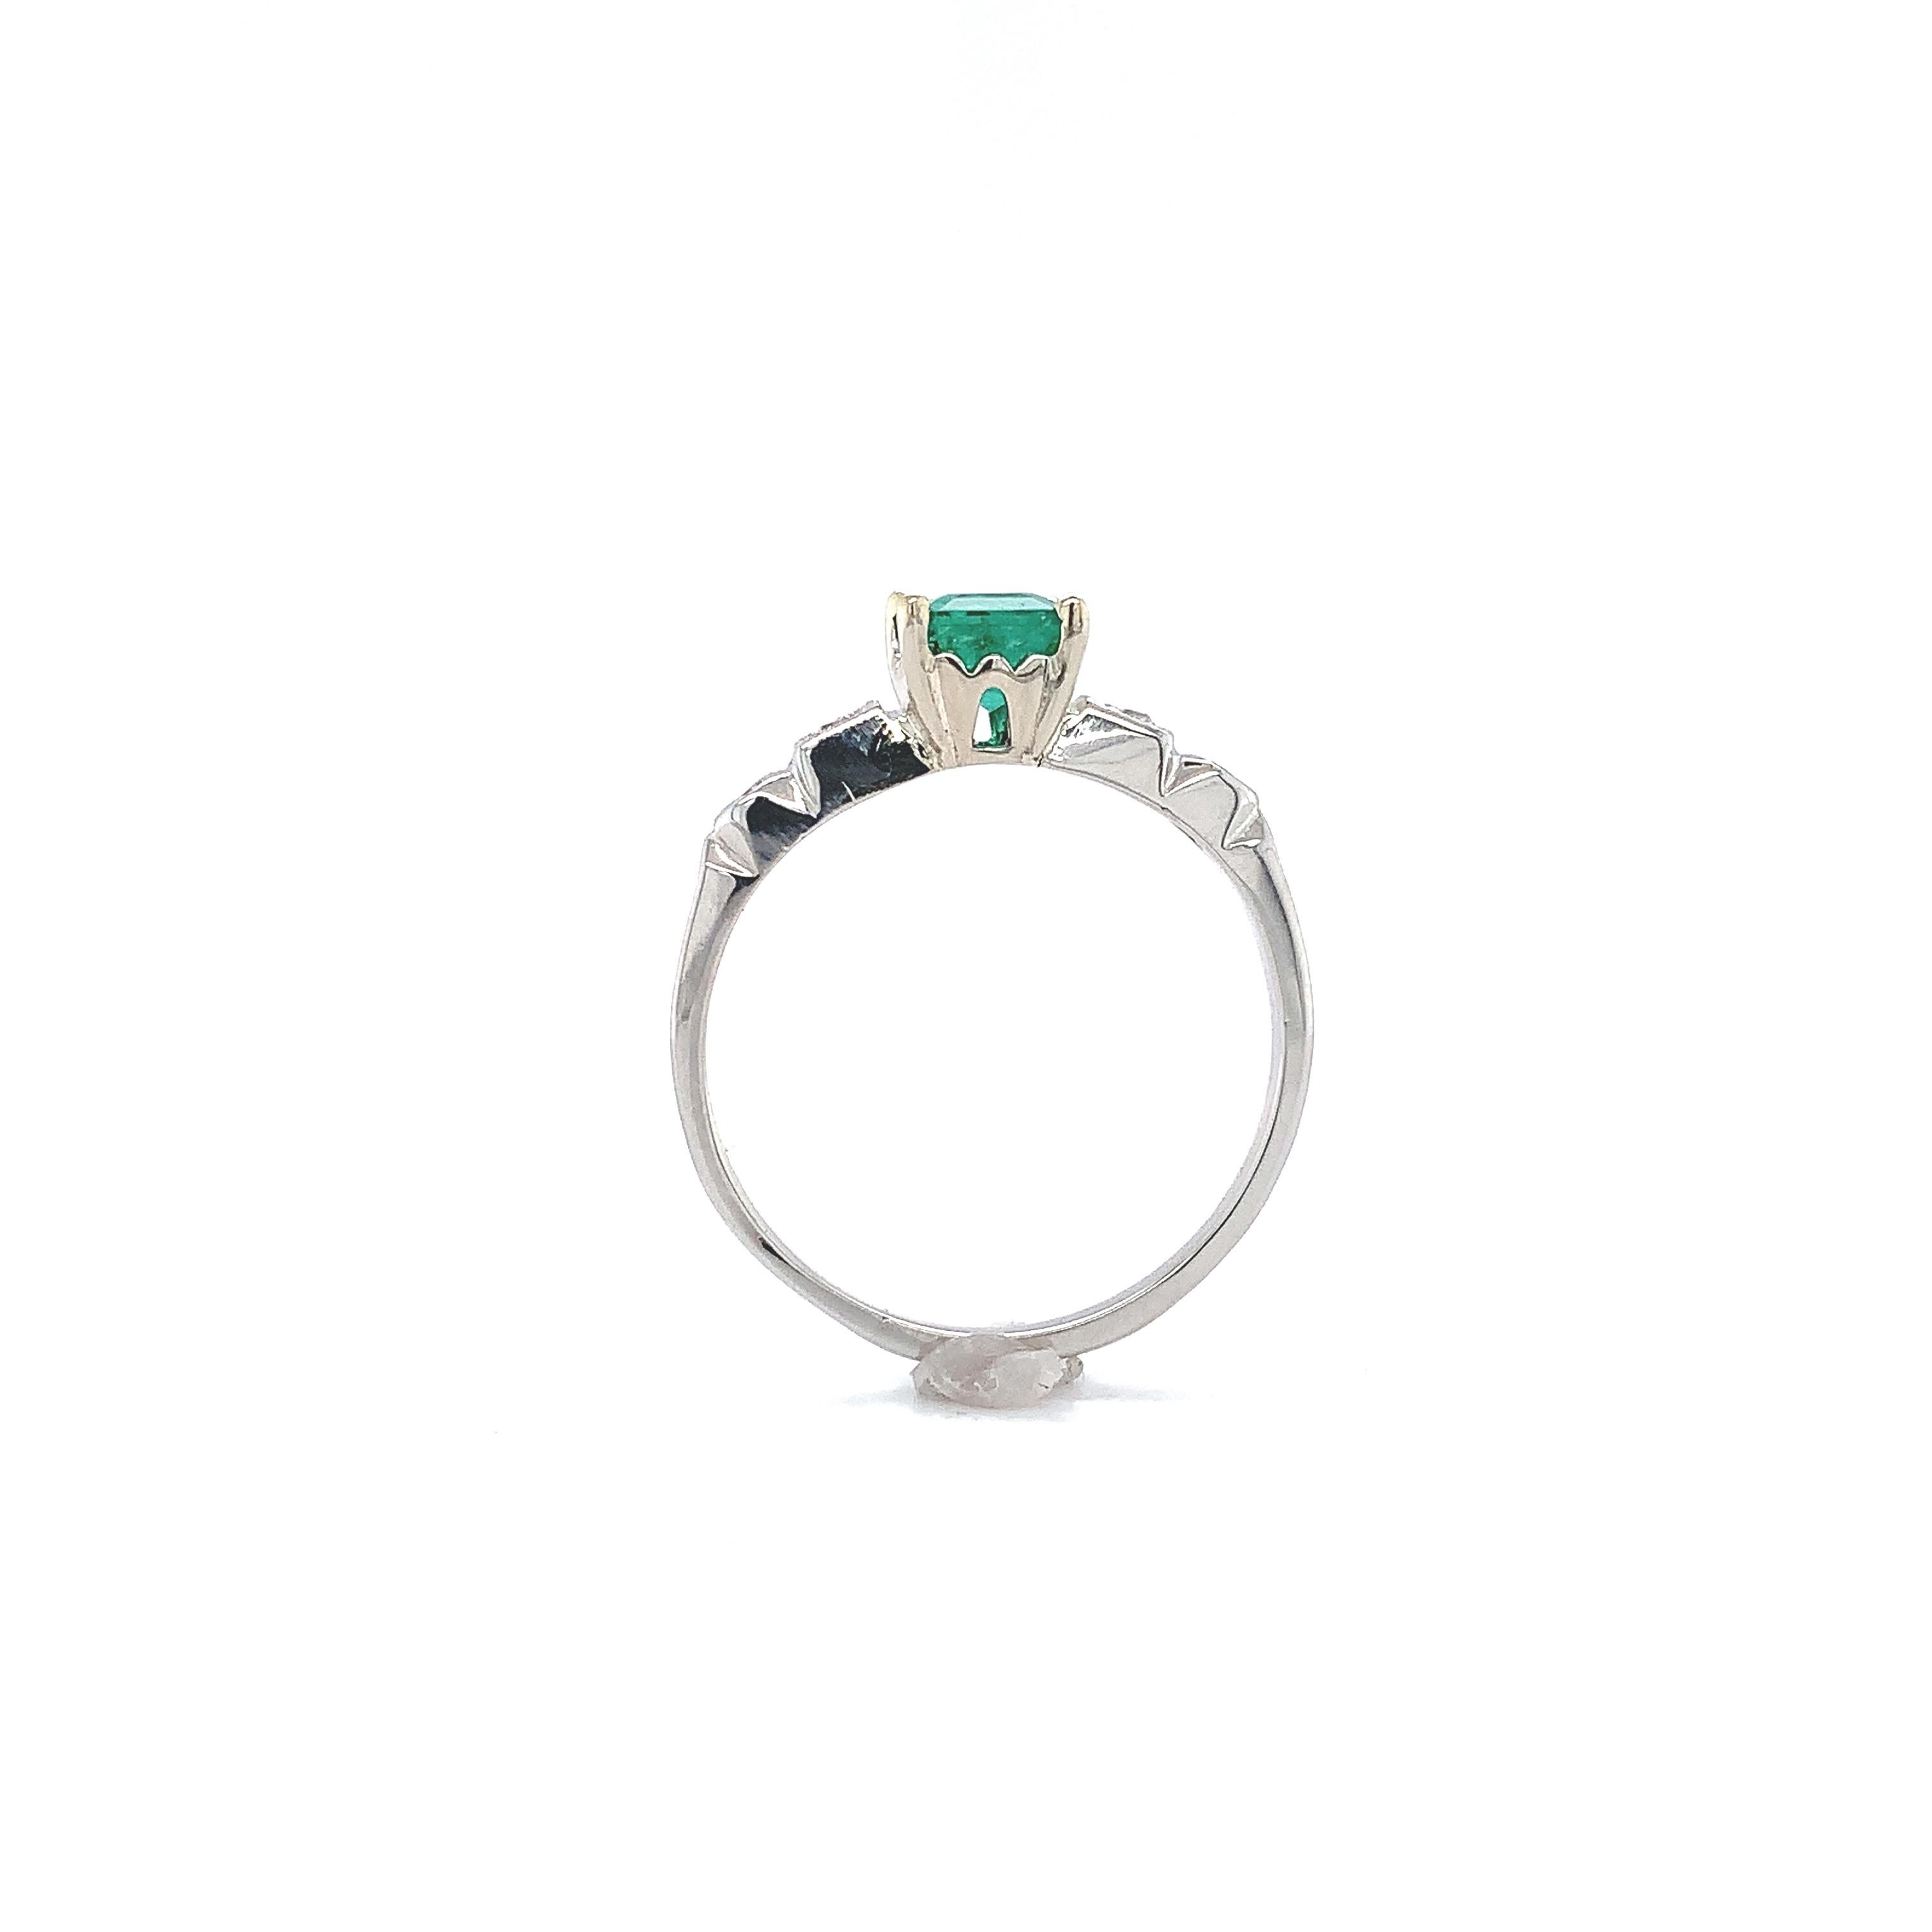 Platinum emerald and diamond ring featuring a genuine earth mined emerald weighing .82 carats with a 14K white gold head. The emerald is an emerald cut measuring 6mm x 5mm and has a bright grass green color. There are 4 small round diamond accents